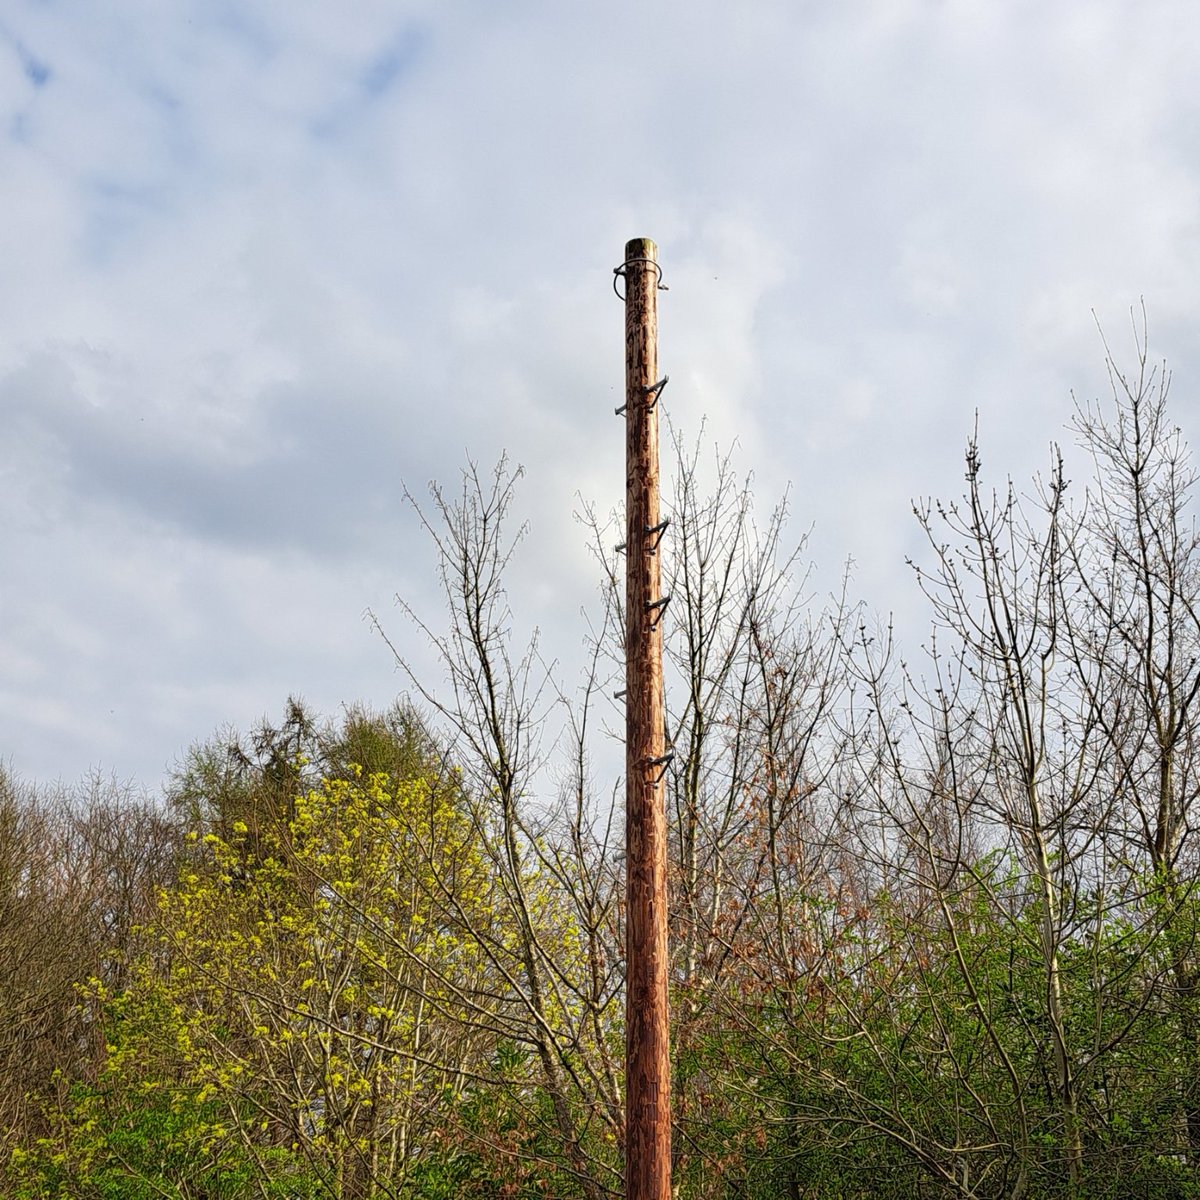 Today, I left a Farcebook group called 'The Dull Men's Group' - They've rejected all of my posts: apparently, I'm not dull enough. I'll let you decide ... today's post was of a telegraph pole (installed 4 years ago) that STILL has no wires!